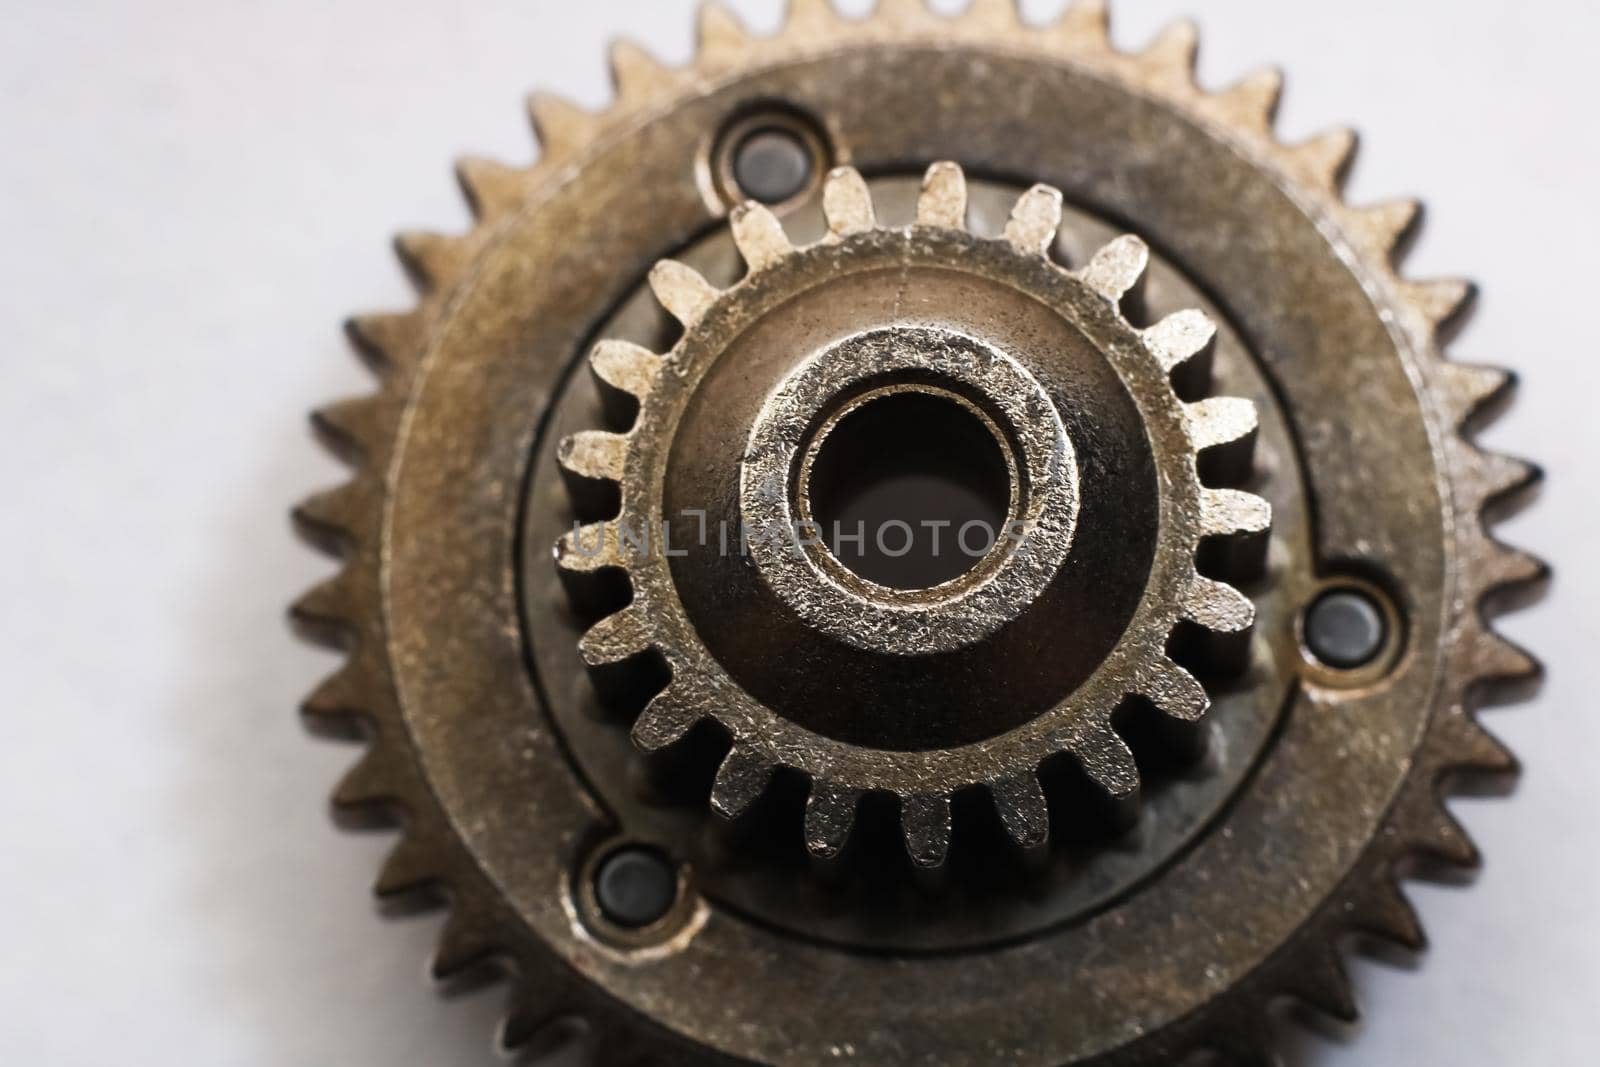 Gear close up on a gray background with copy space